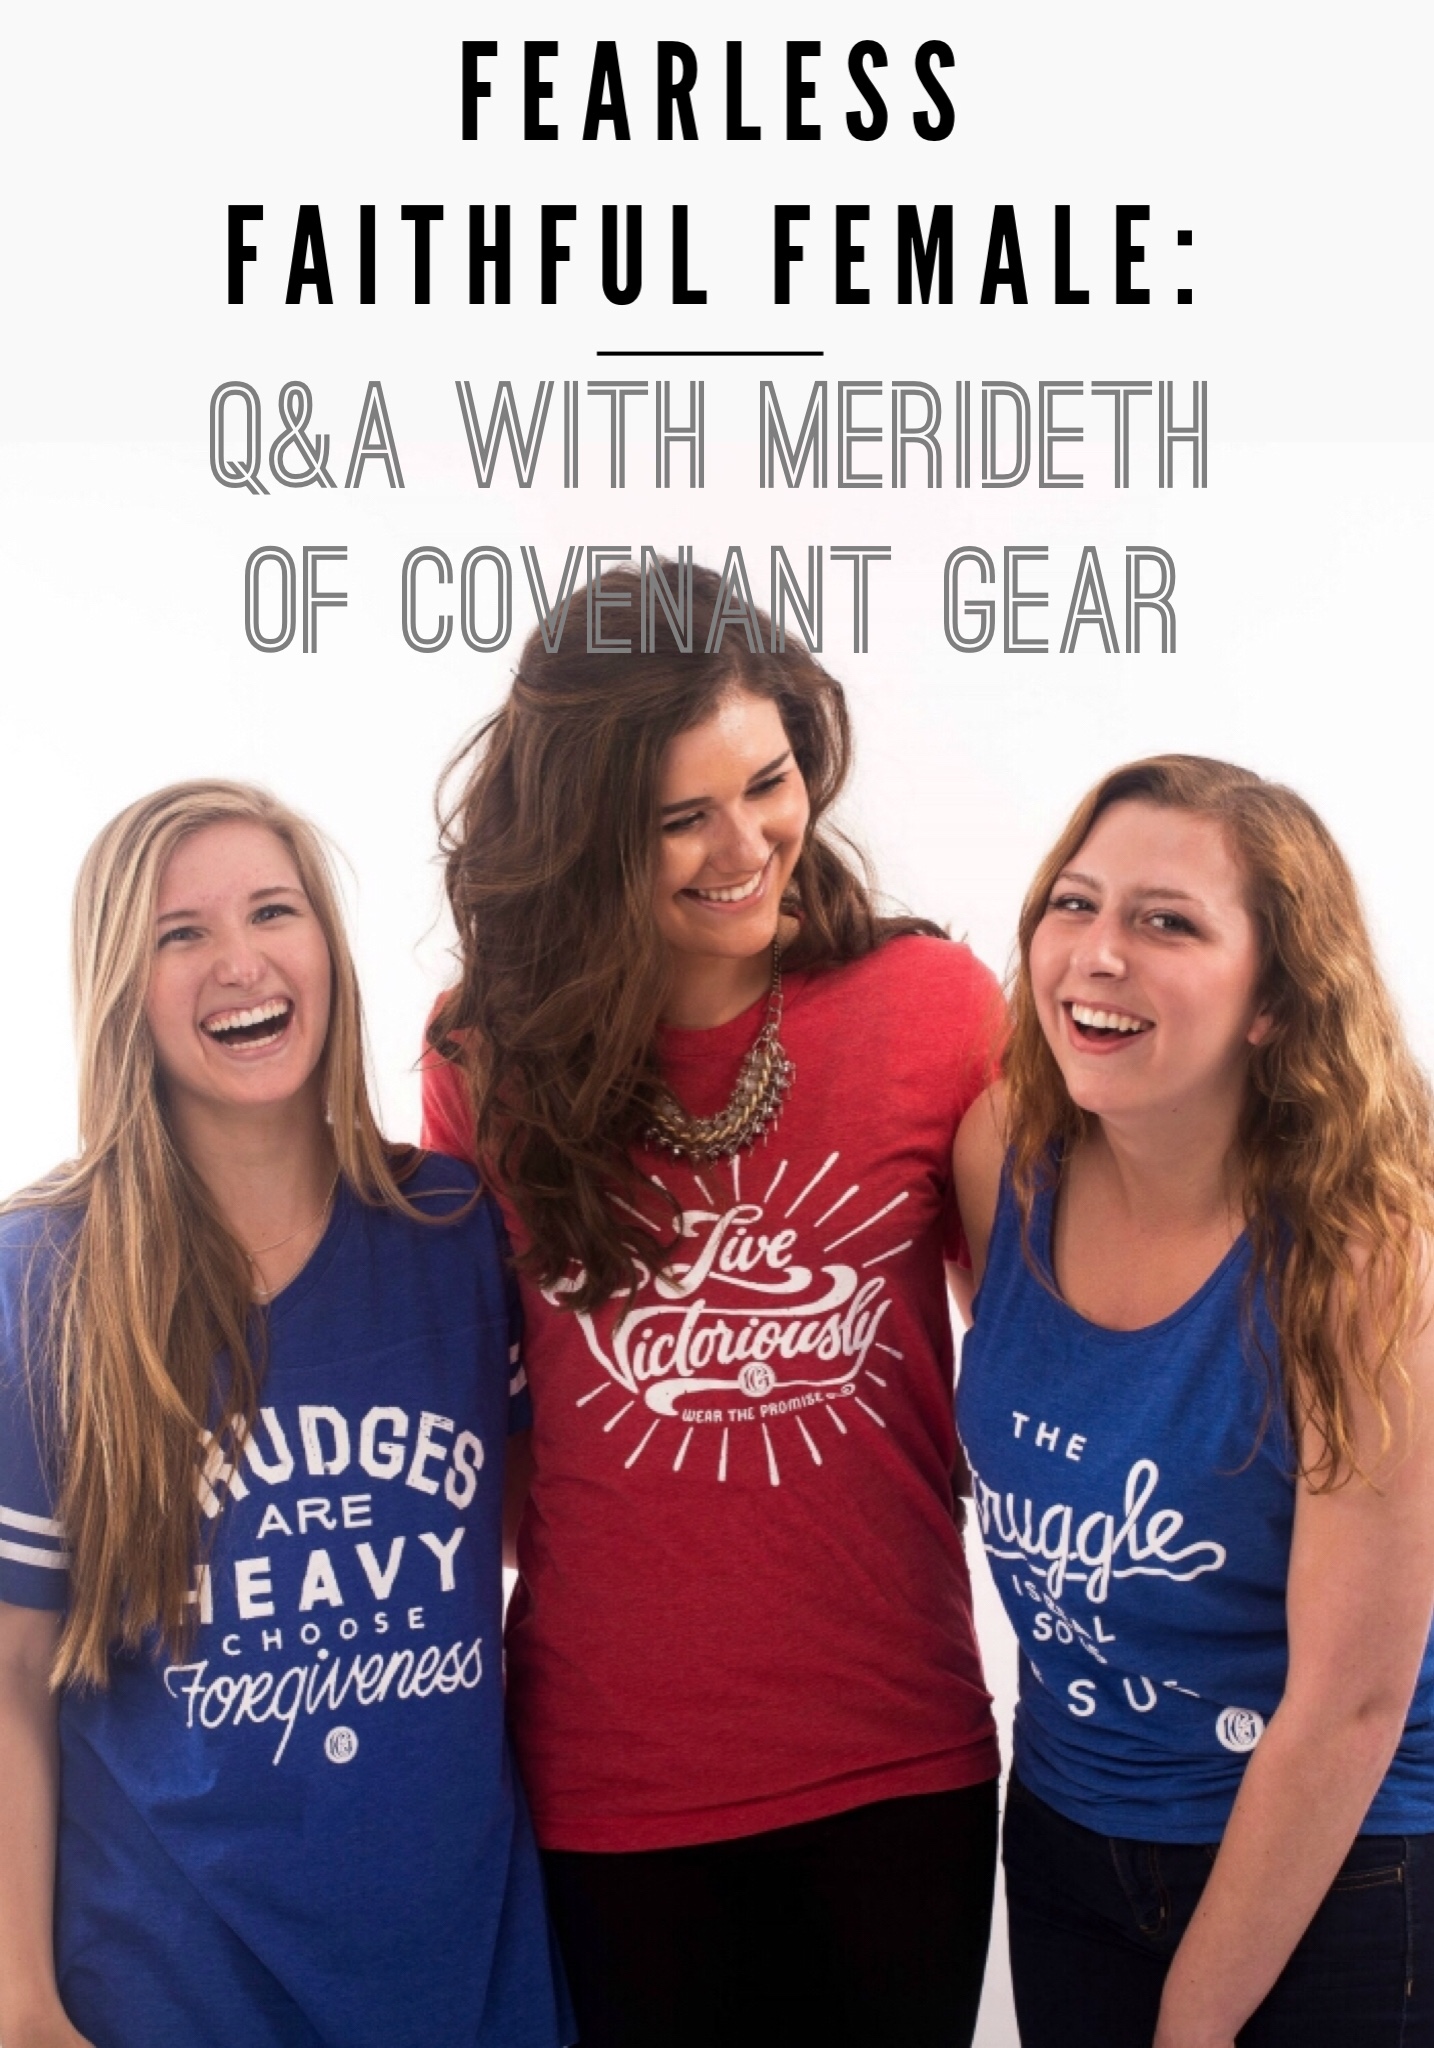 Awesome Interview with Merideth of Covenant Gear on Downtown Demure